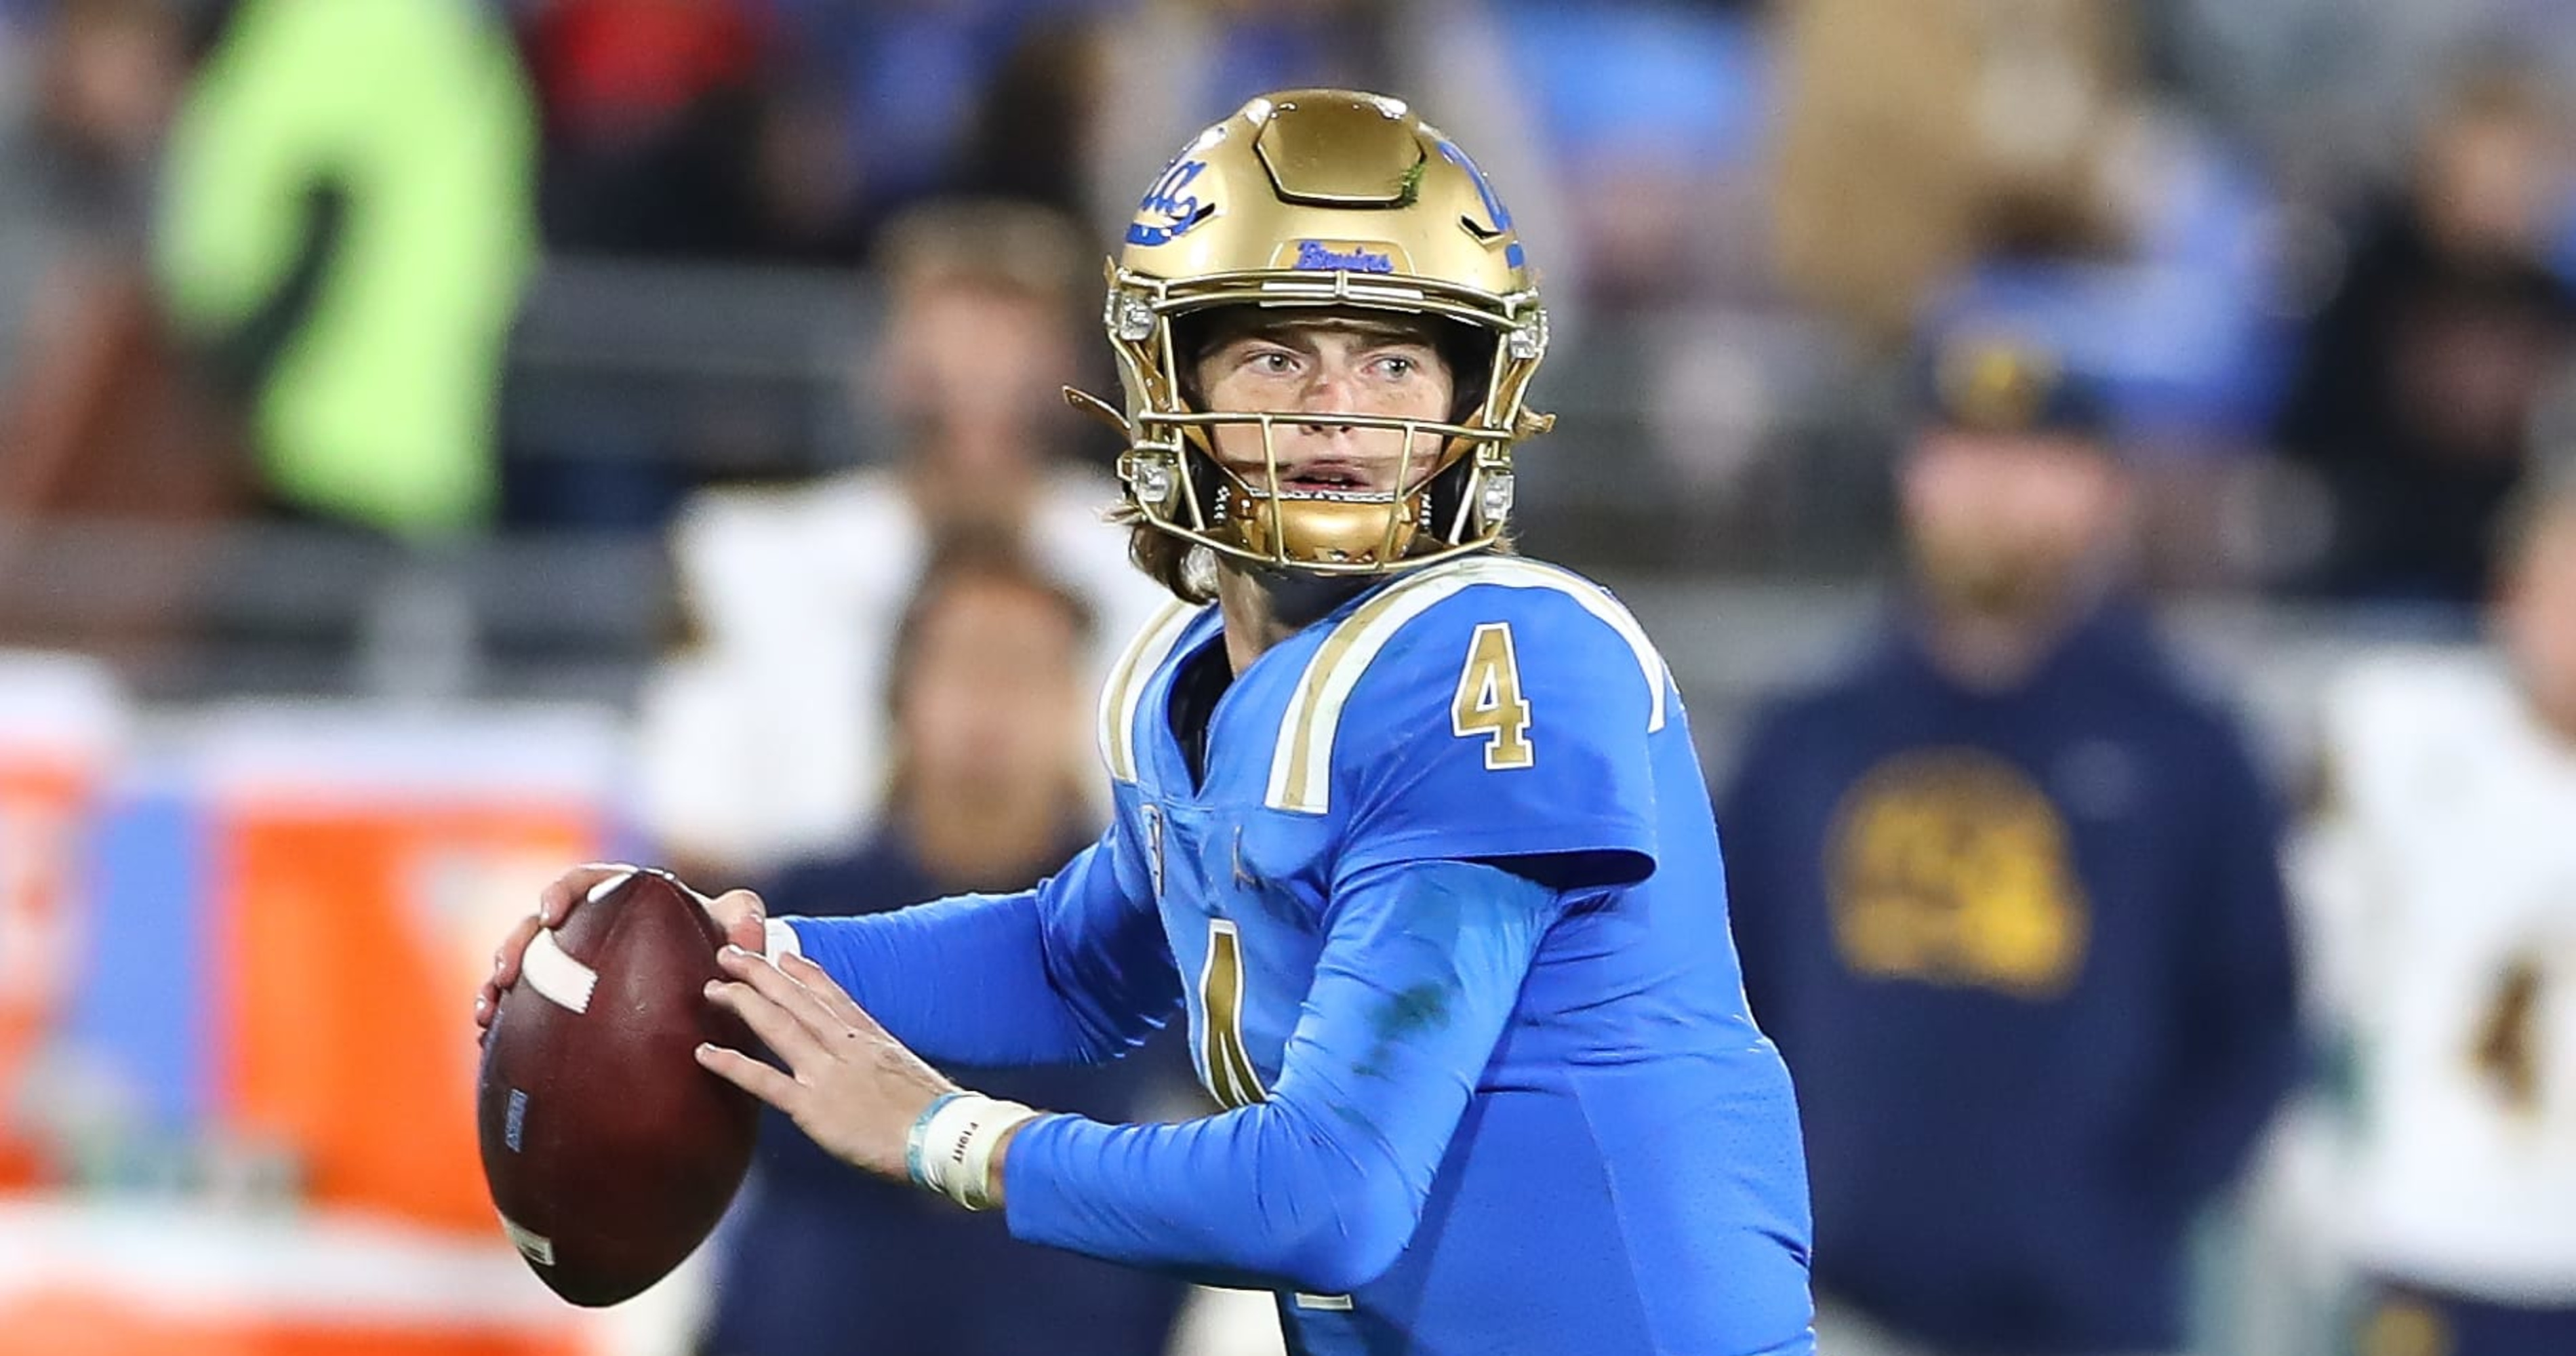 UCLA's Ethan Garbers Wows CFB Fans in LA Bowl Win vs. Boise State amid Moore Transfer